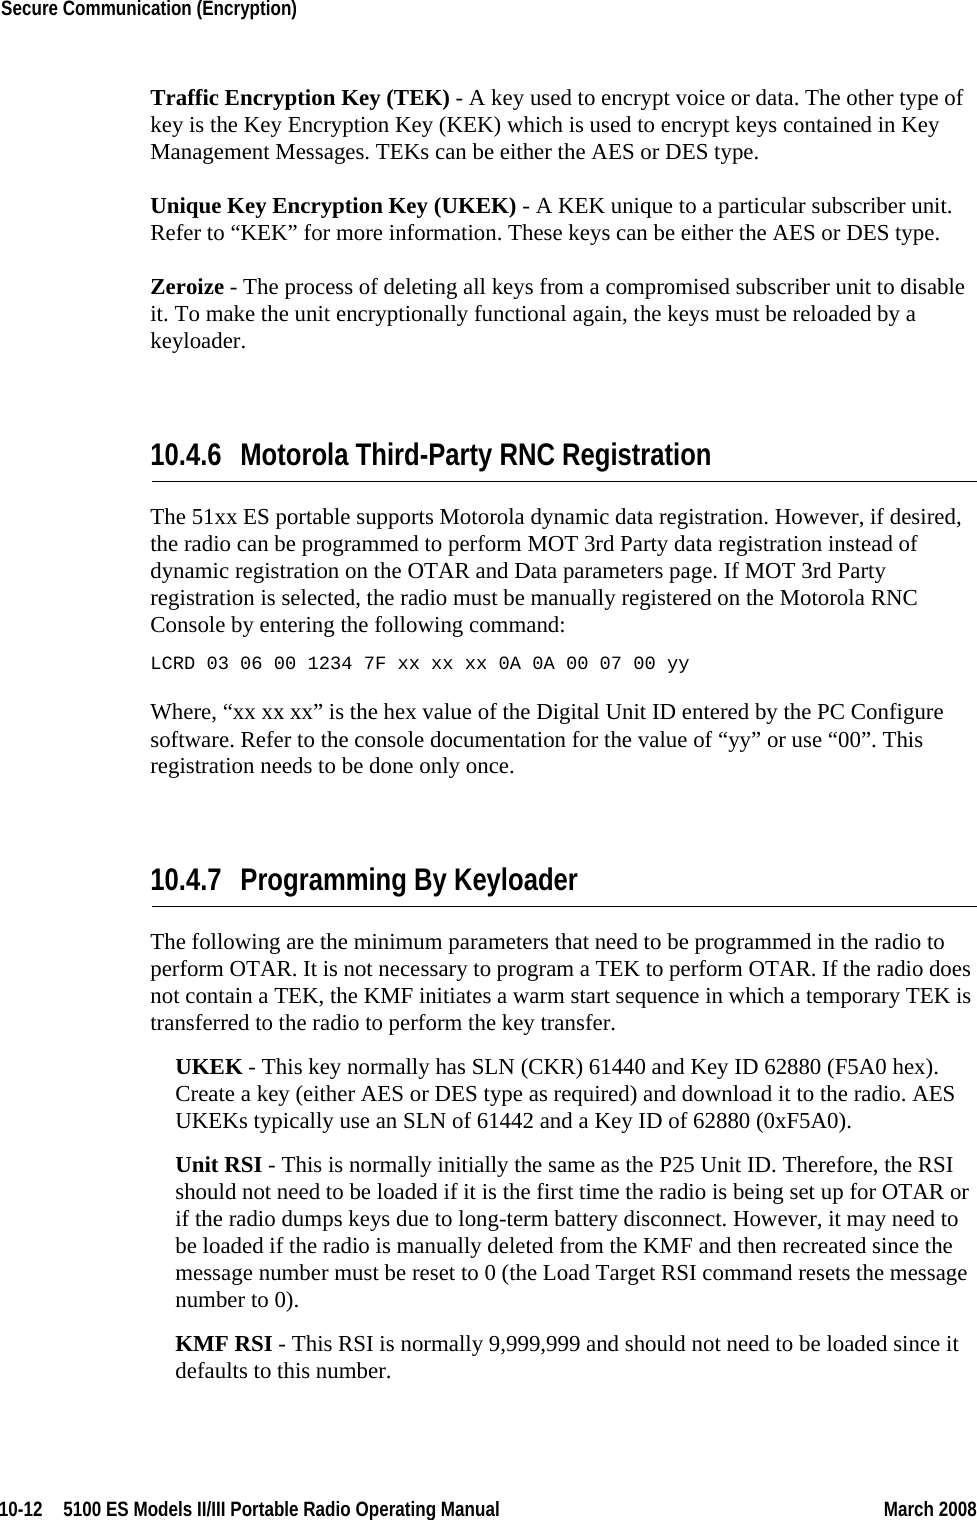 10-12  5100 ES Models II/III Portable Radio Operating Manual March 2008Secure Communication (Encryption) Traffic Encryption Key (TEK) - A key used to encrypt voice or data. The other type of key is the Key Encryption Key (KEK) which is used to encrypt keys contained in Key Management Messages. TEKs can be either the AES or DES type.Unique Key Encryption Key (UKEK) - A KEK unique to a particular subscriber unit. Refer to “KEK” for more information. These keys can be either the AES or DES type.Zeroize - The process of deleting all keys from a compromised subscriber unit to disable it. To make the unit encryptionally functional again, the keys must be reloaded by a keyloader.10.4.6 Motorola Third-Party RNC RegistrationThe 51xx ES portable supports Motorola dynamic data registration. However, if desired, the radio can be programmed to perform MOT 3rd Party data registration instead of dynamic registration on the OTAR and Data parameters page. If MOT 3rd Party registration is selected, the radio must be manually registered on the Motorola RNC Console by entering the following command:LCRD 03 06 00 1234 7F xx xx xx 0A 0A 00 07 00 yyWhere, “xx xx xx” is the hex value of the Digital Unit ID entered by the PC Configure software. Refer to the console documentation for the value of “yy” or use “00”. This registration needs to be done only once.10.4.7 Programming By KeyloaderThe following are the minimum parameters that need to be programmed in the radio to perform OTAR. It is not necessary to program a TEK to perform OTAR. If the radio does not contain a TEK, the KMF initiates a warm start sequence in which a temporary TEK is transferred to the radio to perform the key transfer.UKEK - This key normally has SLN (CKR) 61440 and Key ID 62880 (F5A0 hex). Create a key (either AES or DES type as required) and download it to the radio. AES UKEKs typically use an SLN of 61442 and a Key ID of 62880 (0xF5A0).Unit RSI - This is normally initially the same as the P25 Unit ID. Therefore, the RSI should not need to be loaded if it is the first time the radio is being set up for OTAR or if the radio dumps keys due to long-term battery disconnect. However, it may need to be loaded if the radio is manually deleted from the KMF and then recreated since the message number must be reset to 0 (the Load Target RSI command resets the message number to 0).KMF RSI - This RSI is normally 9,999,999 and should not need to be loaded since it defaults to this number.